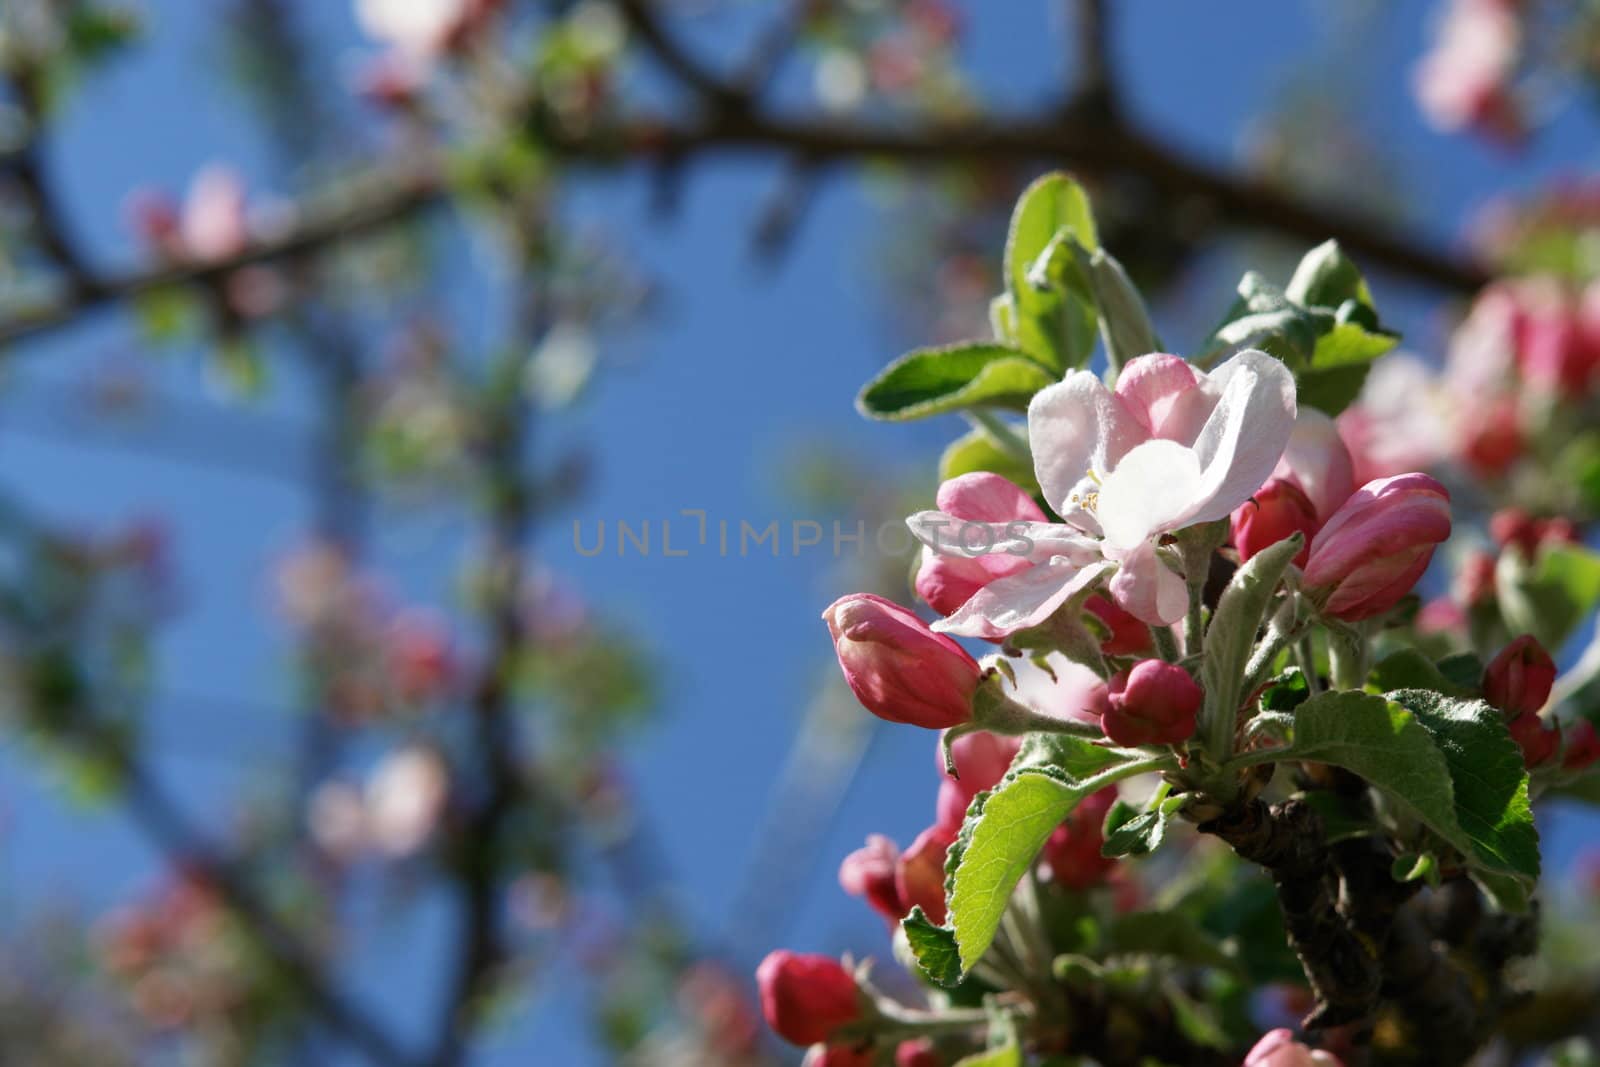 apple blossoms against blue sky on a sunny day apple blossoms against blue sky on a sunny day